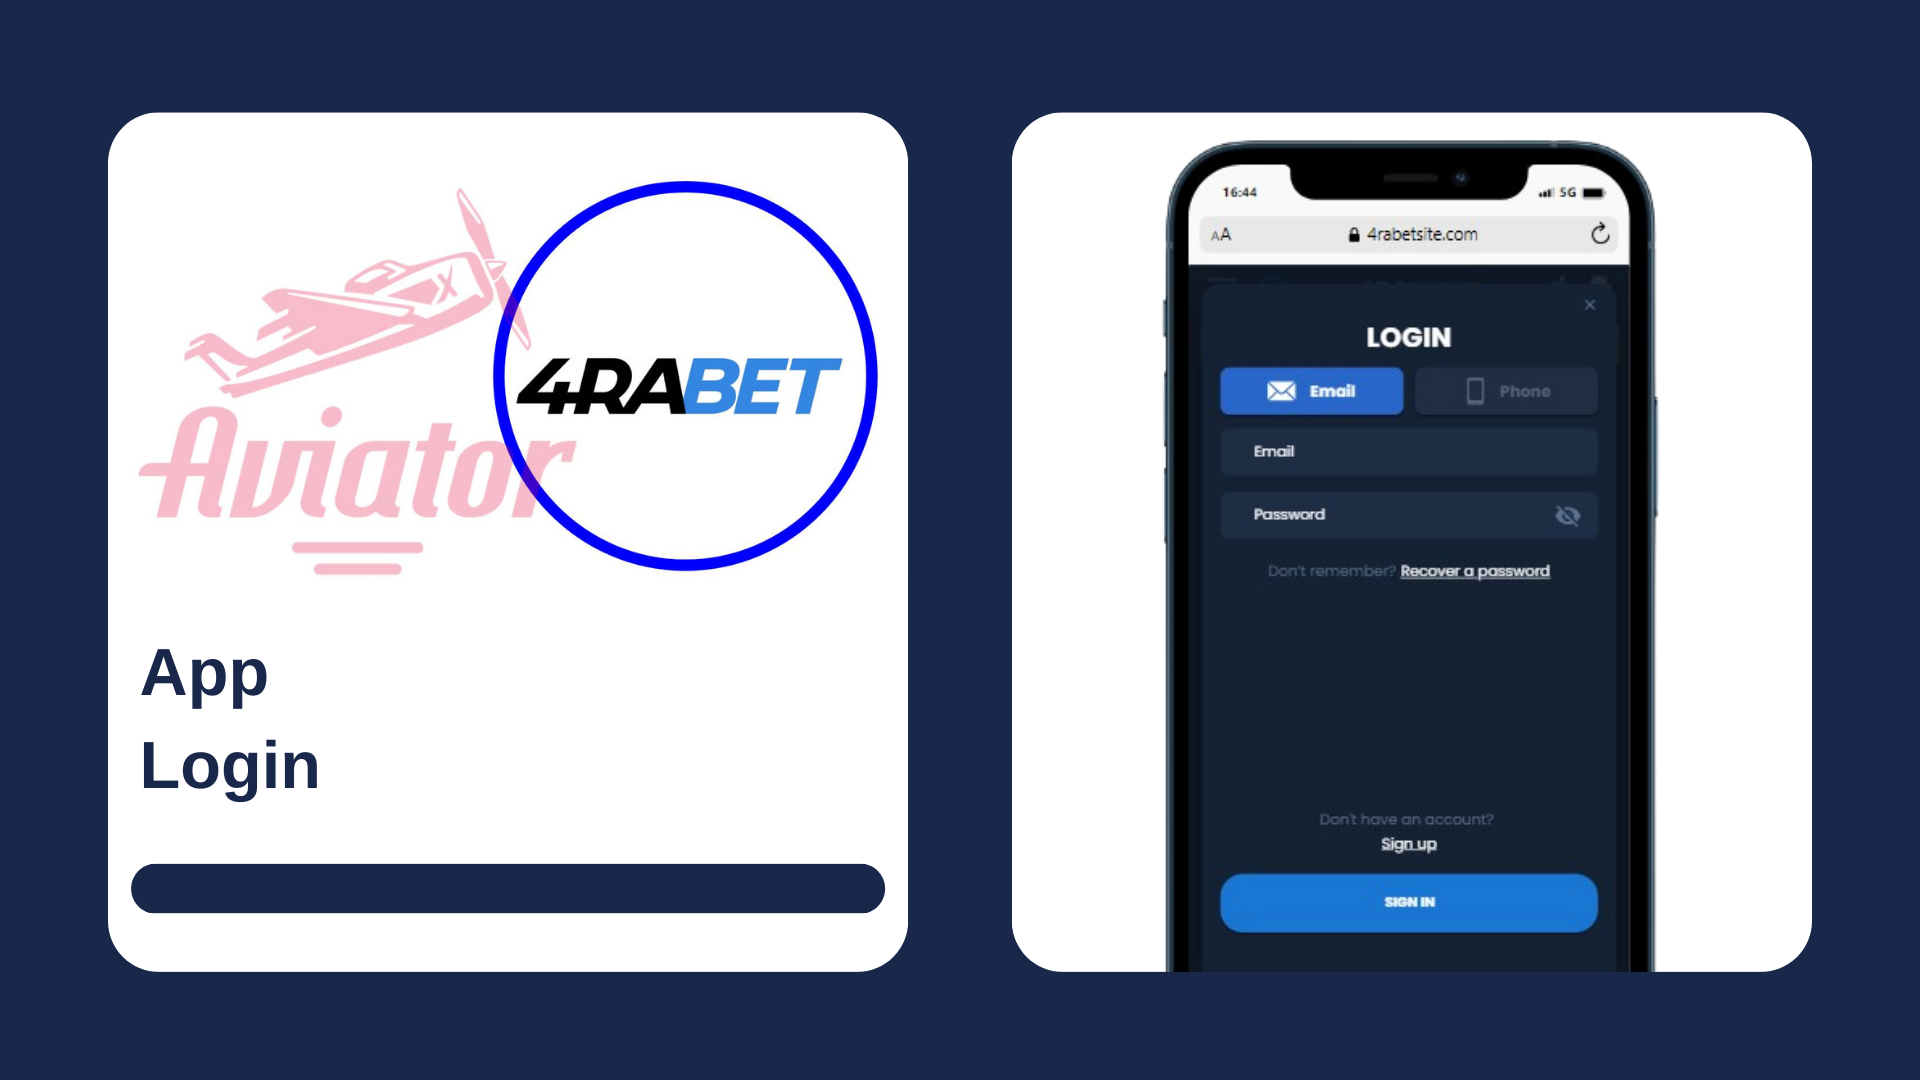 A smartphone showing login form of the casino, with Aviator game and 4rabet logos